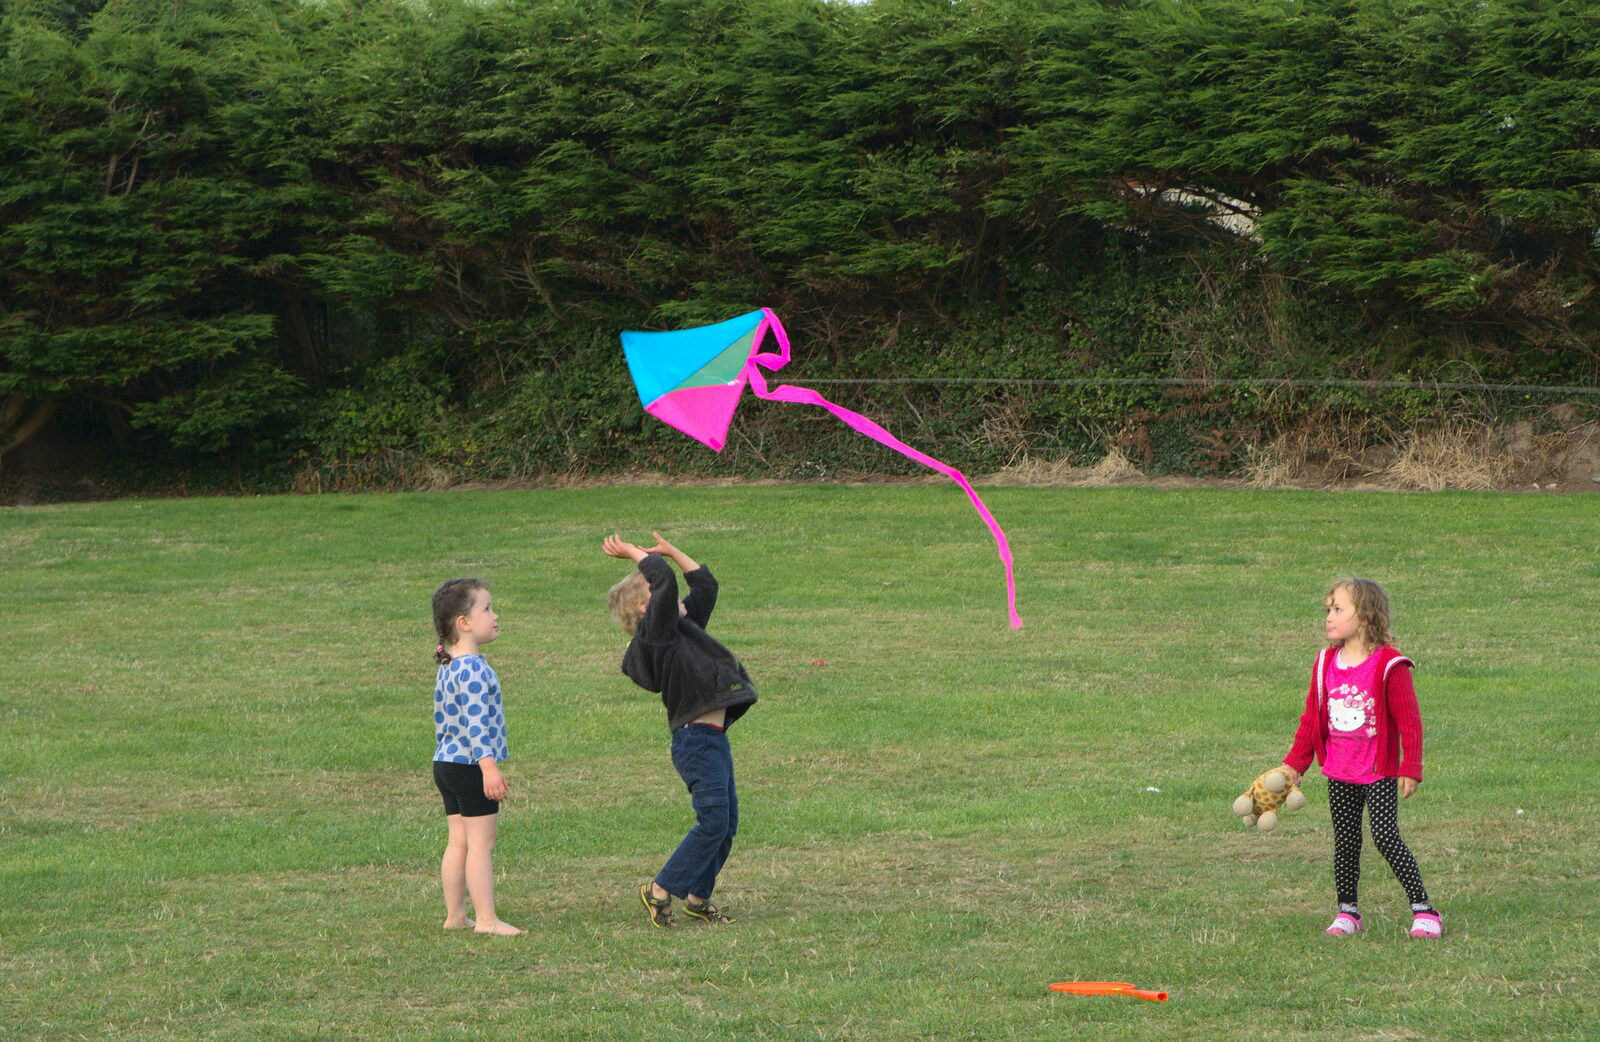 Time to fly a kite from Camping at Silver Strand, Wicklow, County Wicklow, Ireland - 7th August 2014